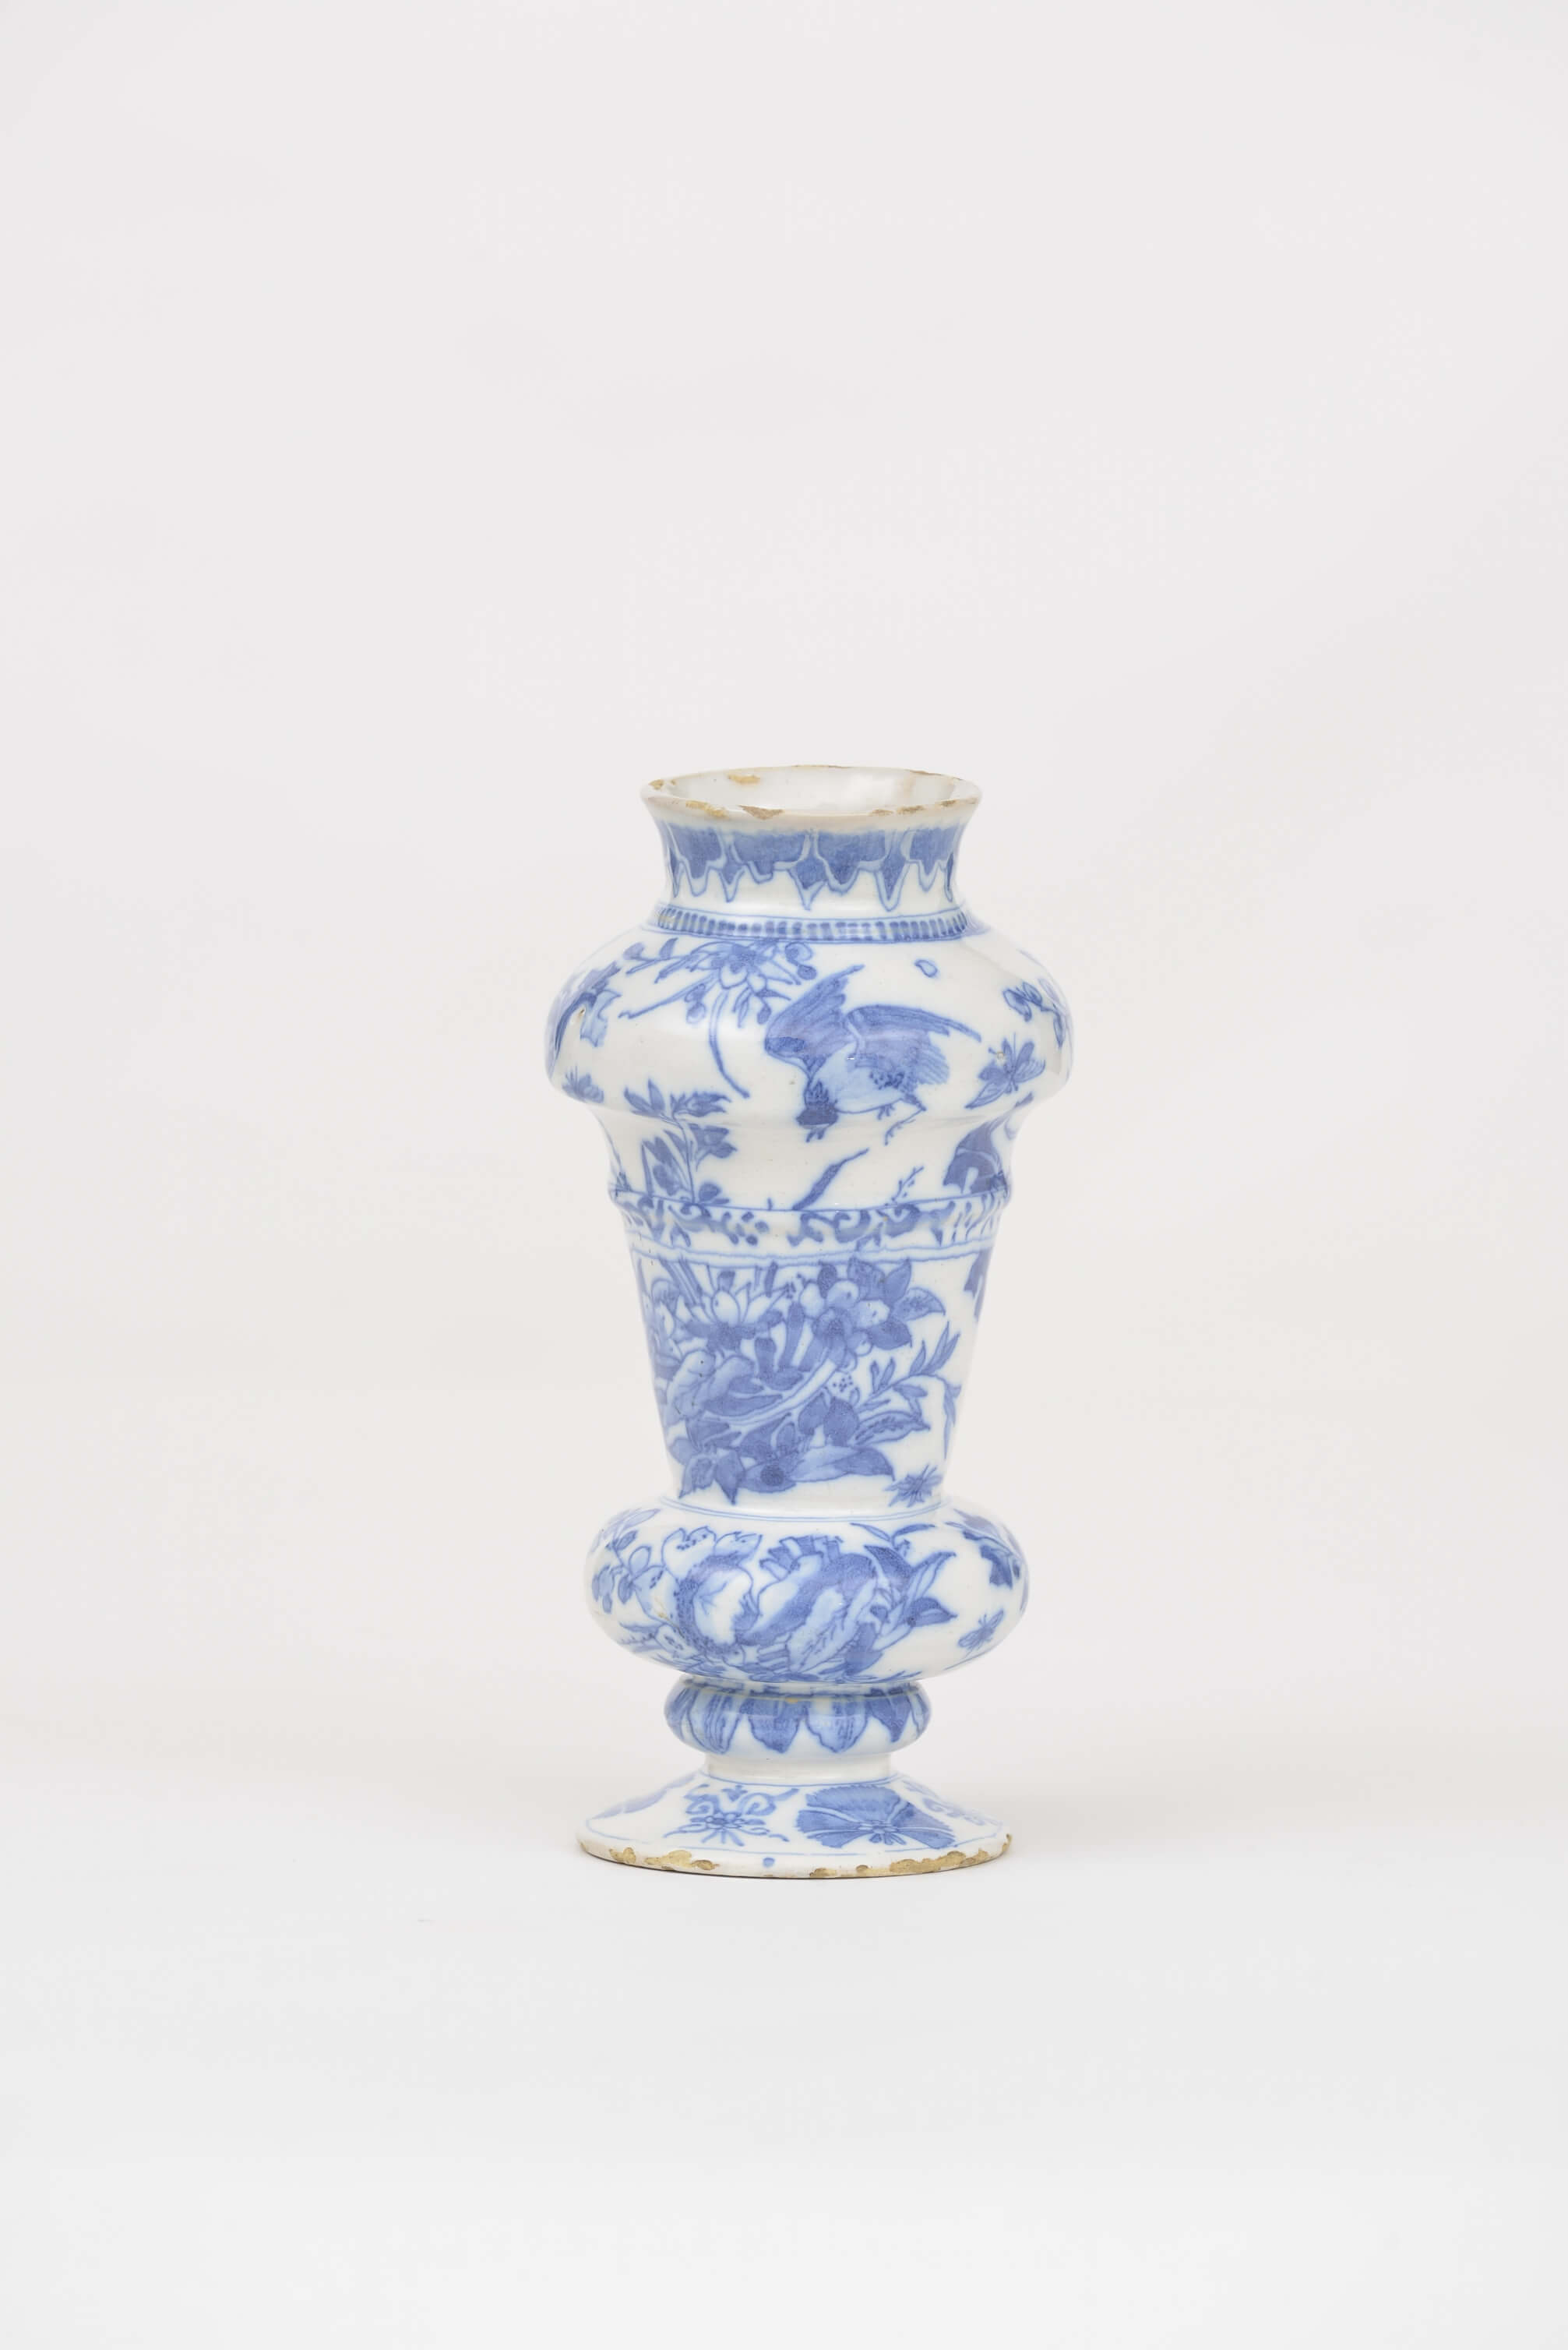 Antique Delft Pottery of Double Baluster Vase